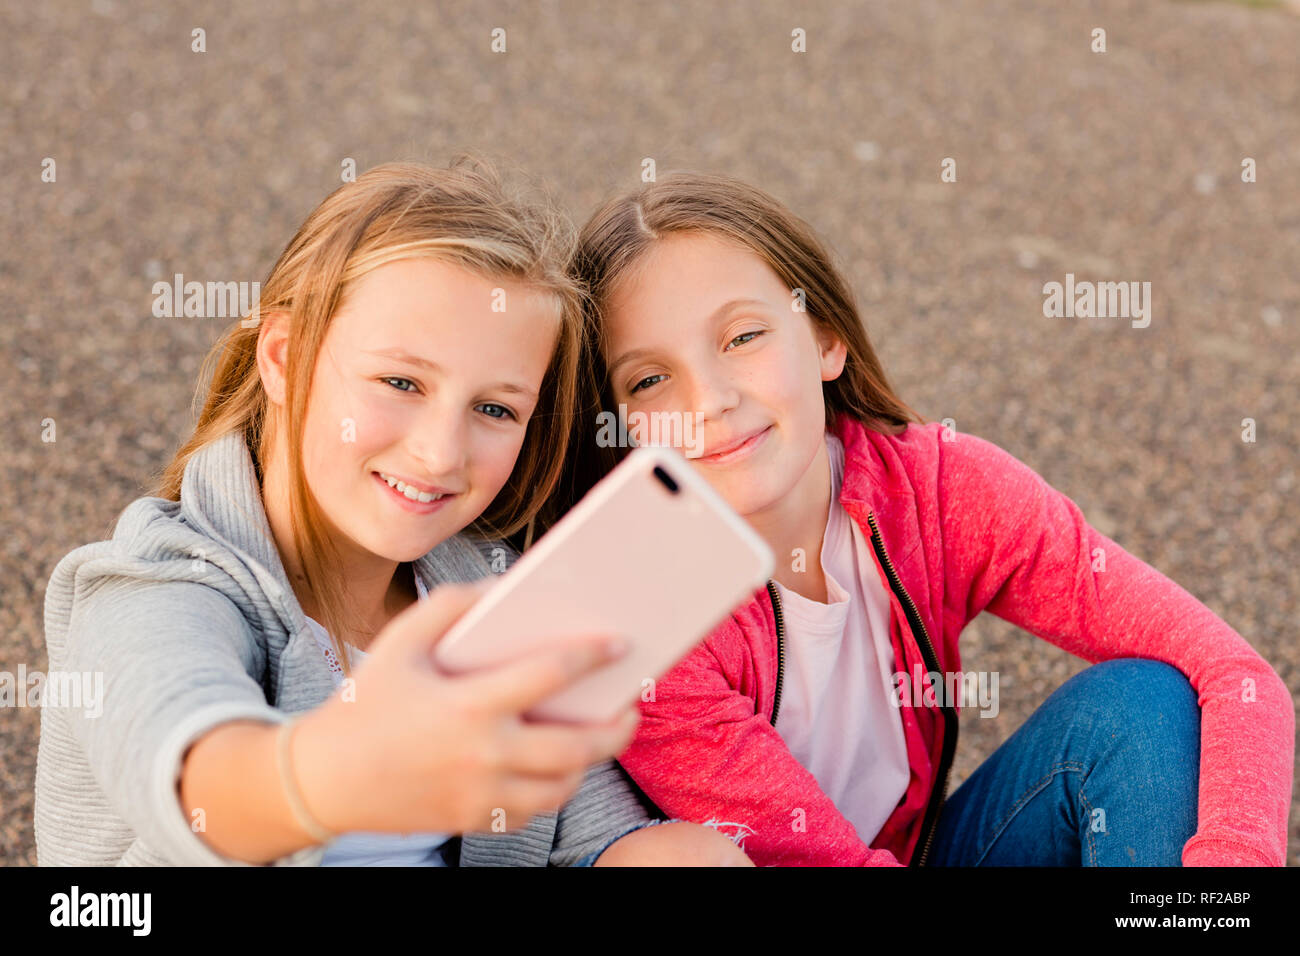 Portrait of two smiling girls taking selfie with smartphone Stock Photo